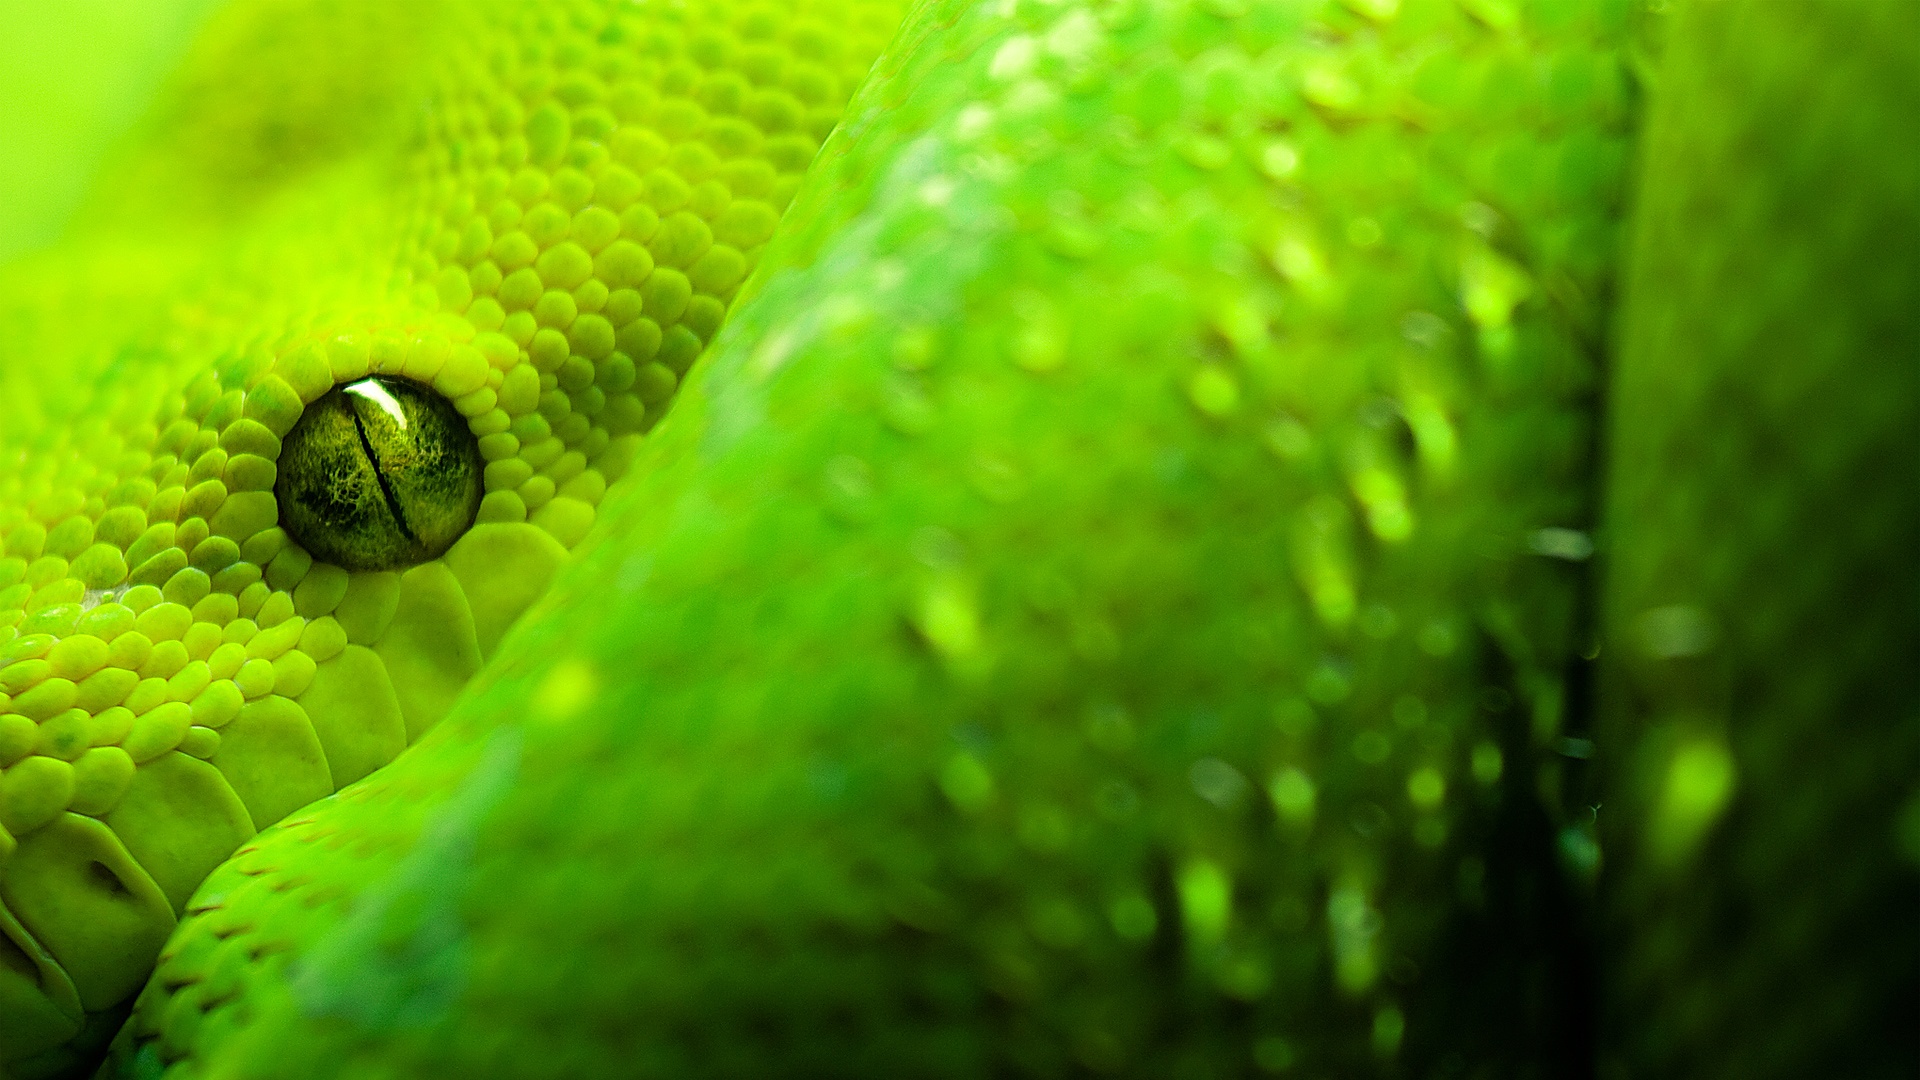 Green Snake Pictures